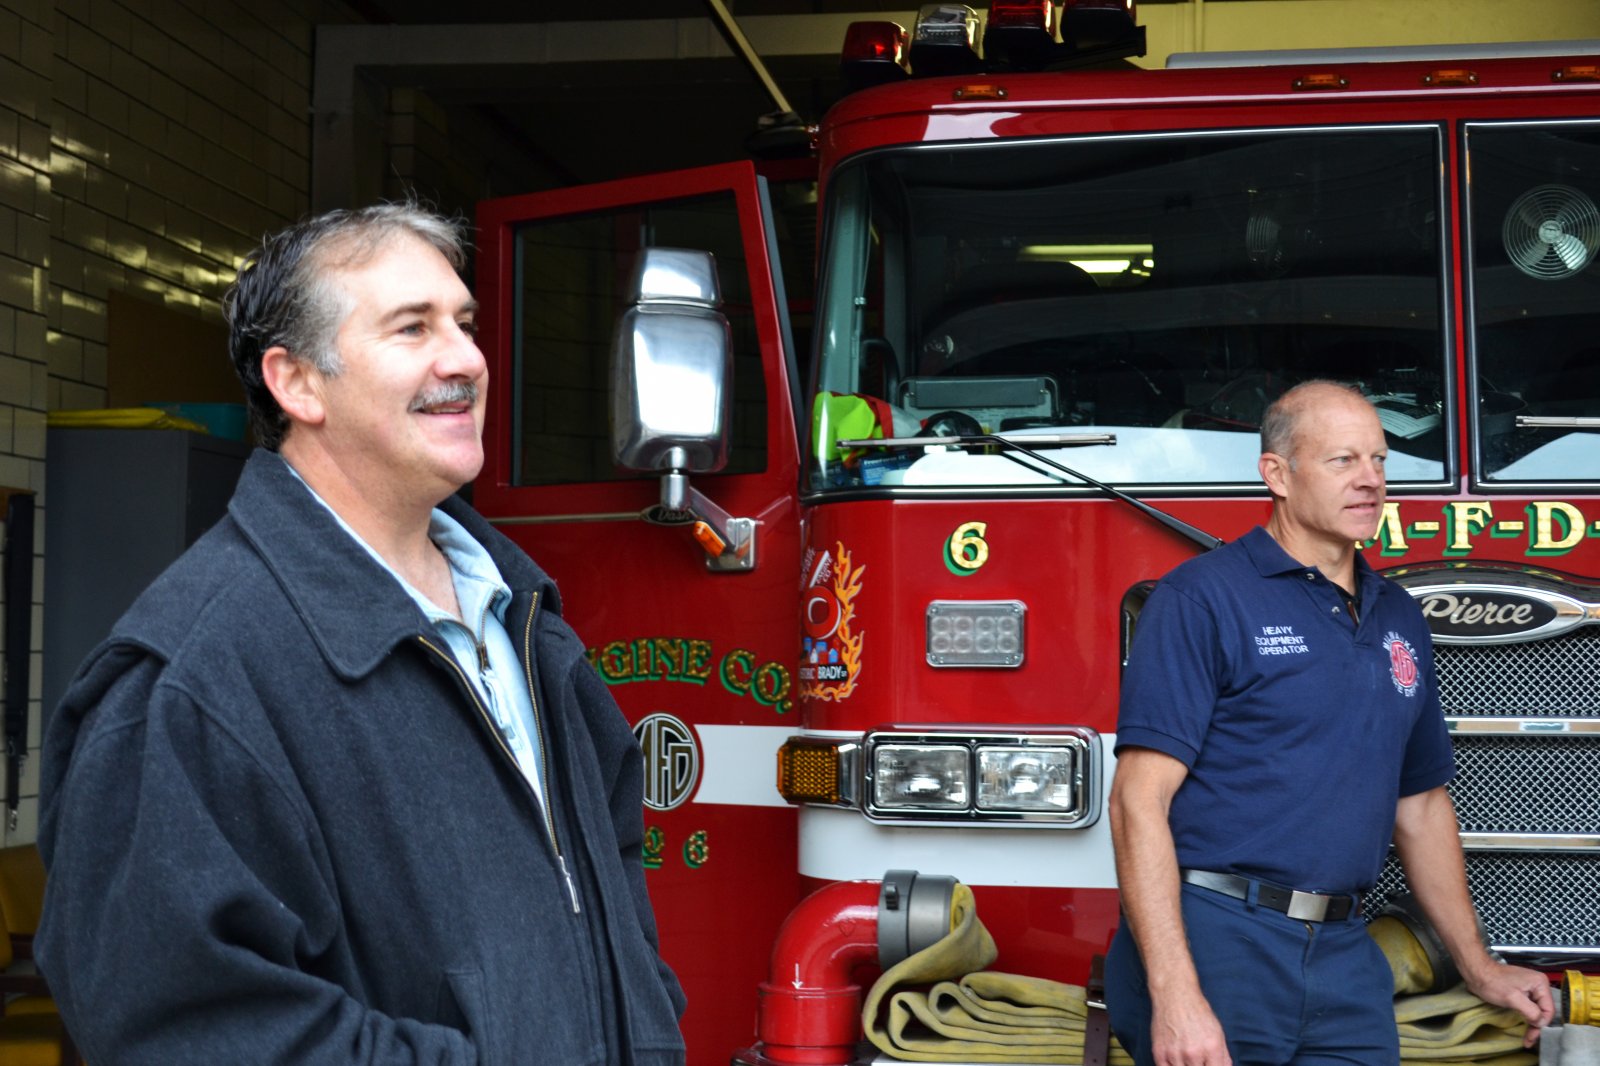 Frank Alioto and Mike Bongiorno at the Brady Street Fire House